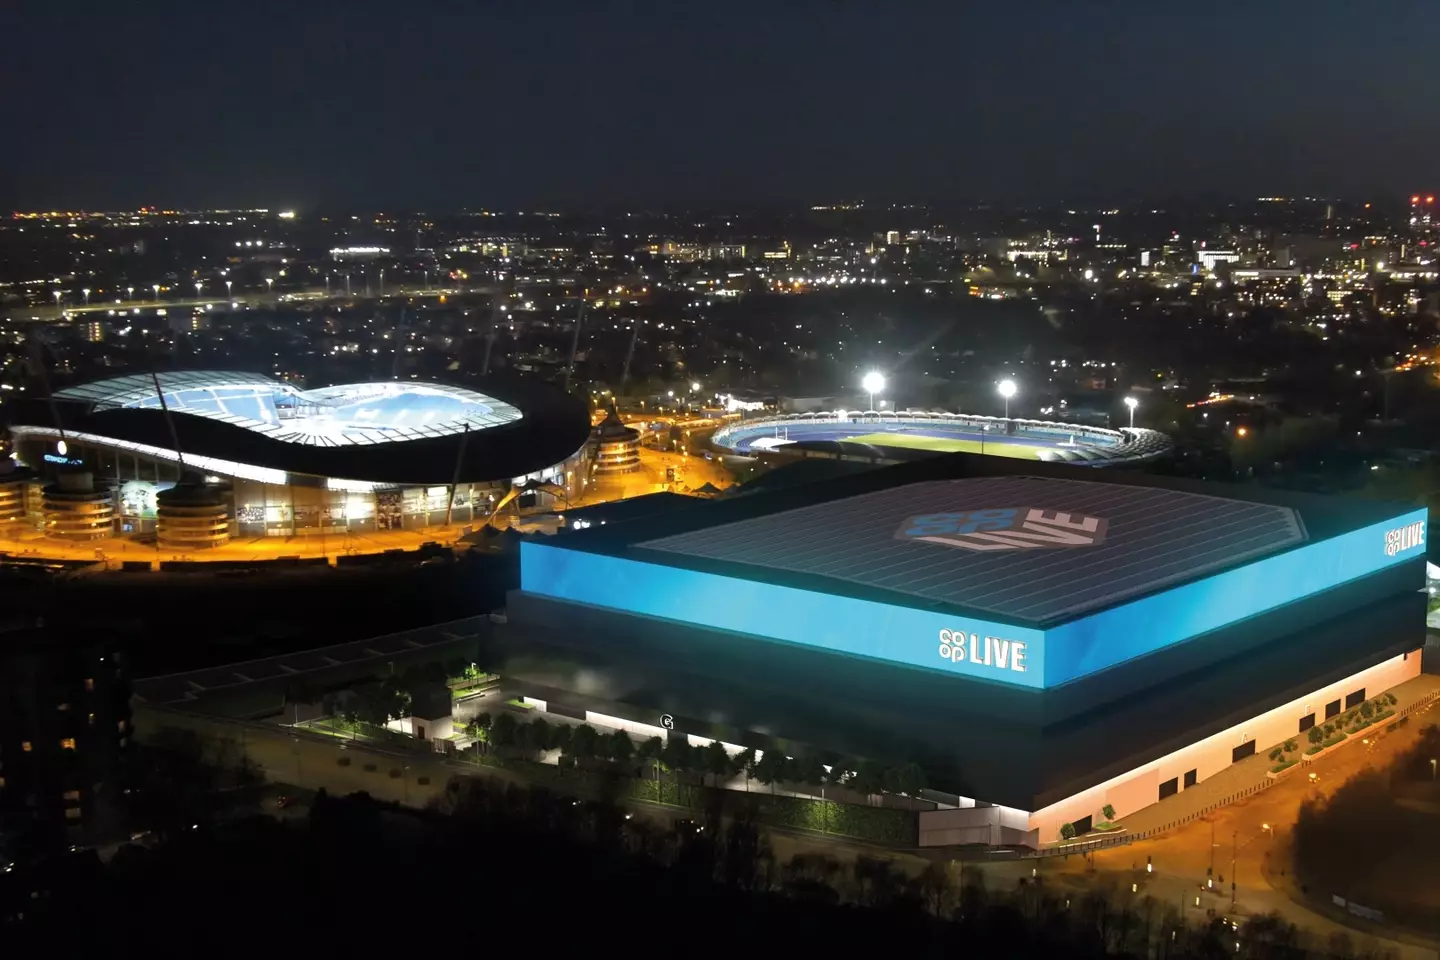 The £365 million venue located in East Manchester will accommodate up to 23,500 people.